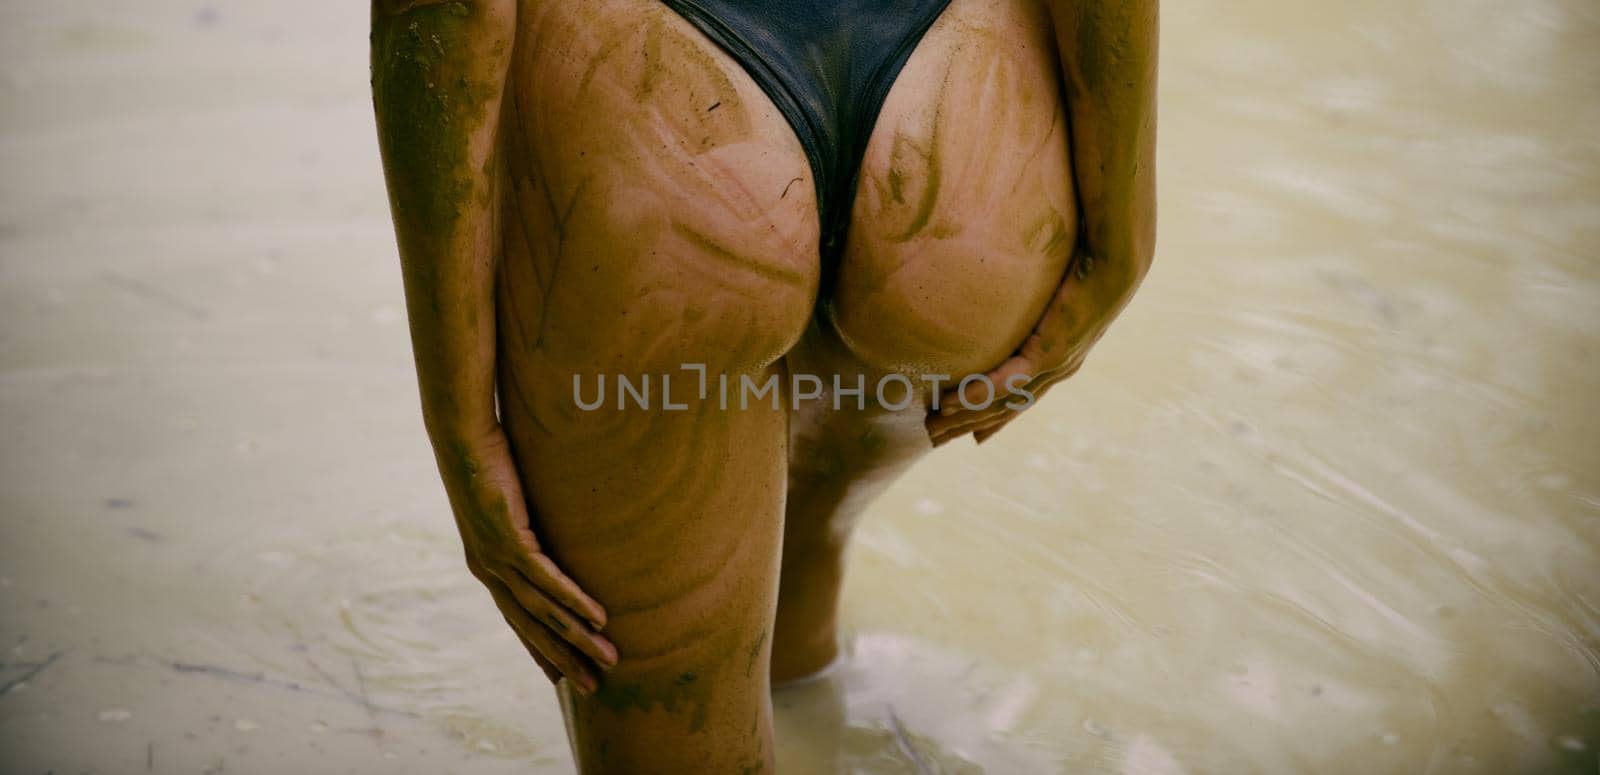 Dirty ass female in panties. Woman in the mud bath. Luxury ass. Huge mud buttocks. Sensual attractive mud womans ass. Spa procedure and body care. Enjoying mud